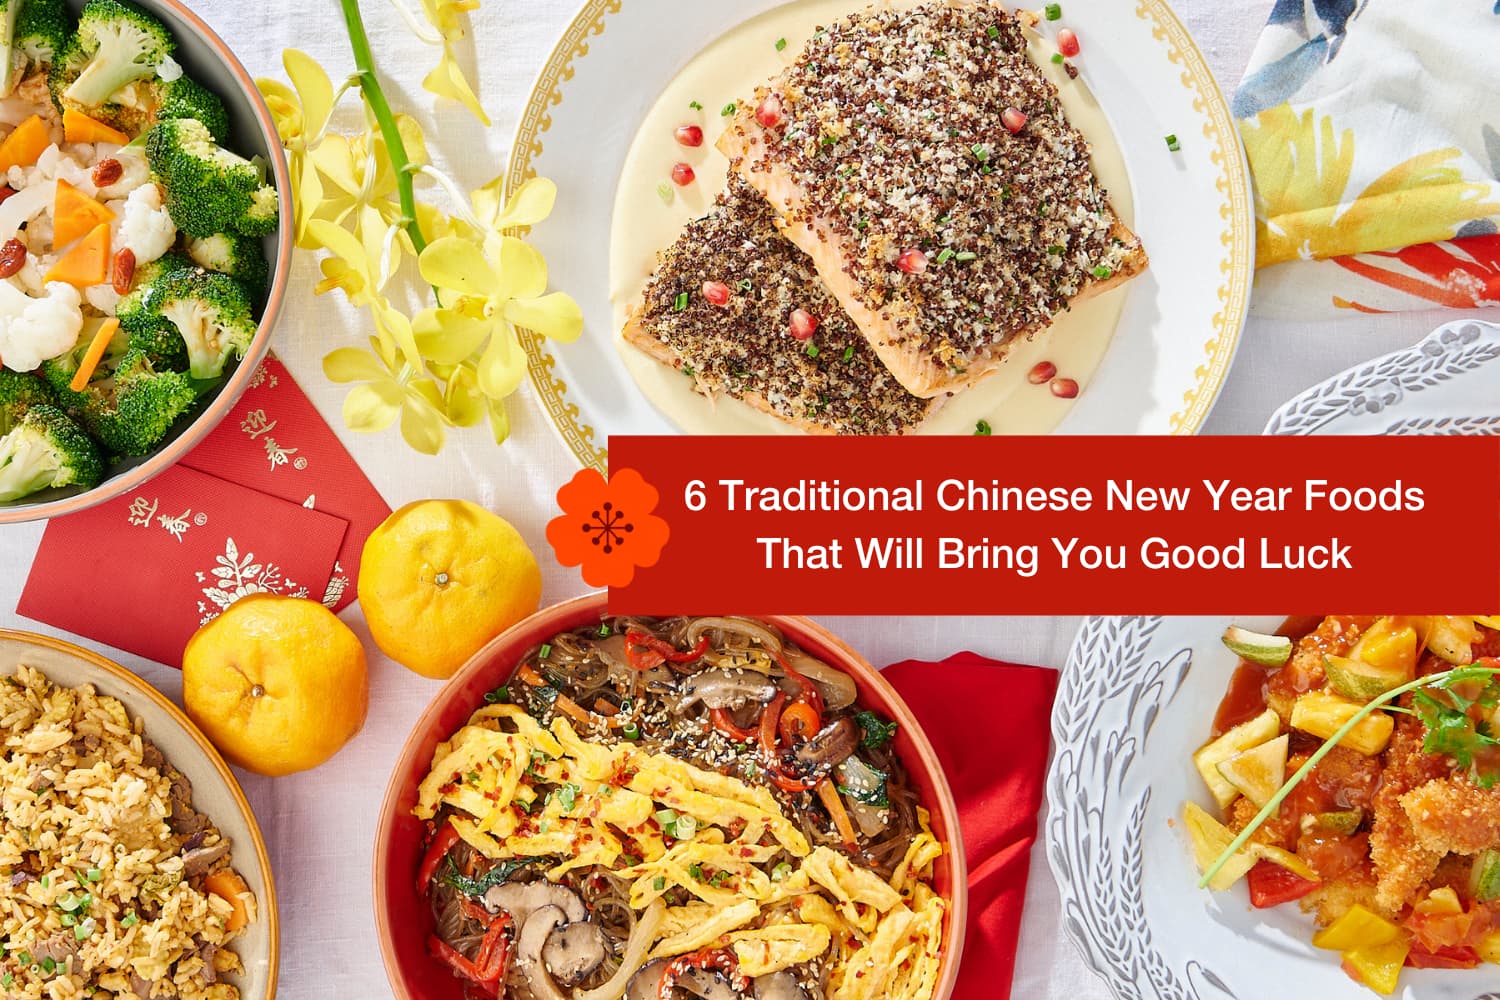 Chinese New Year: The traditional Chinese dishes for luck and